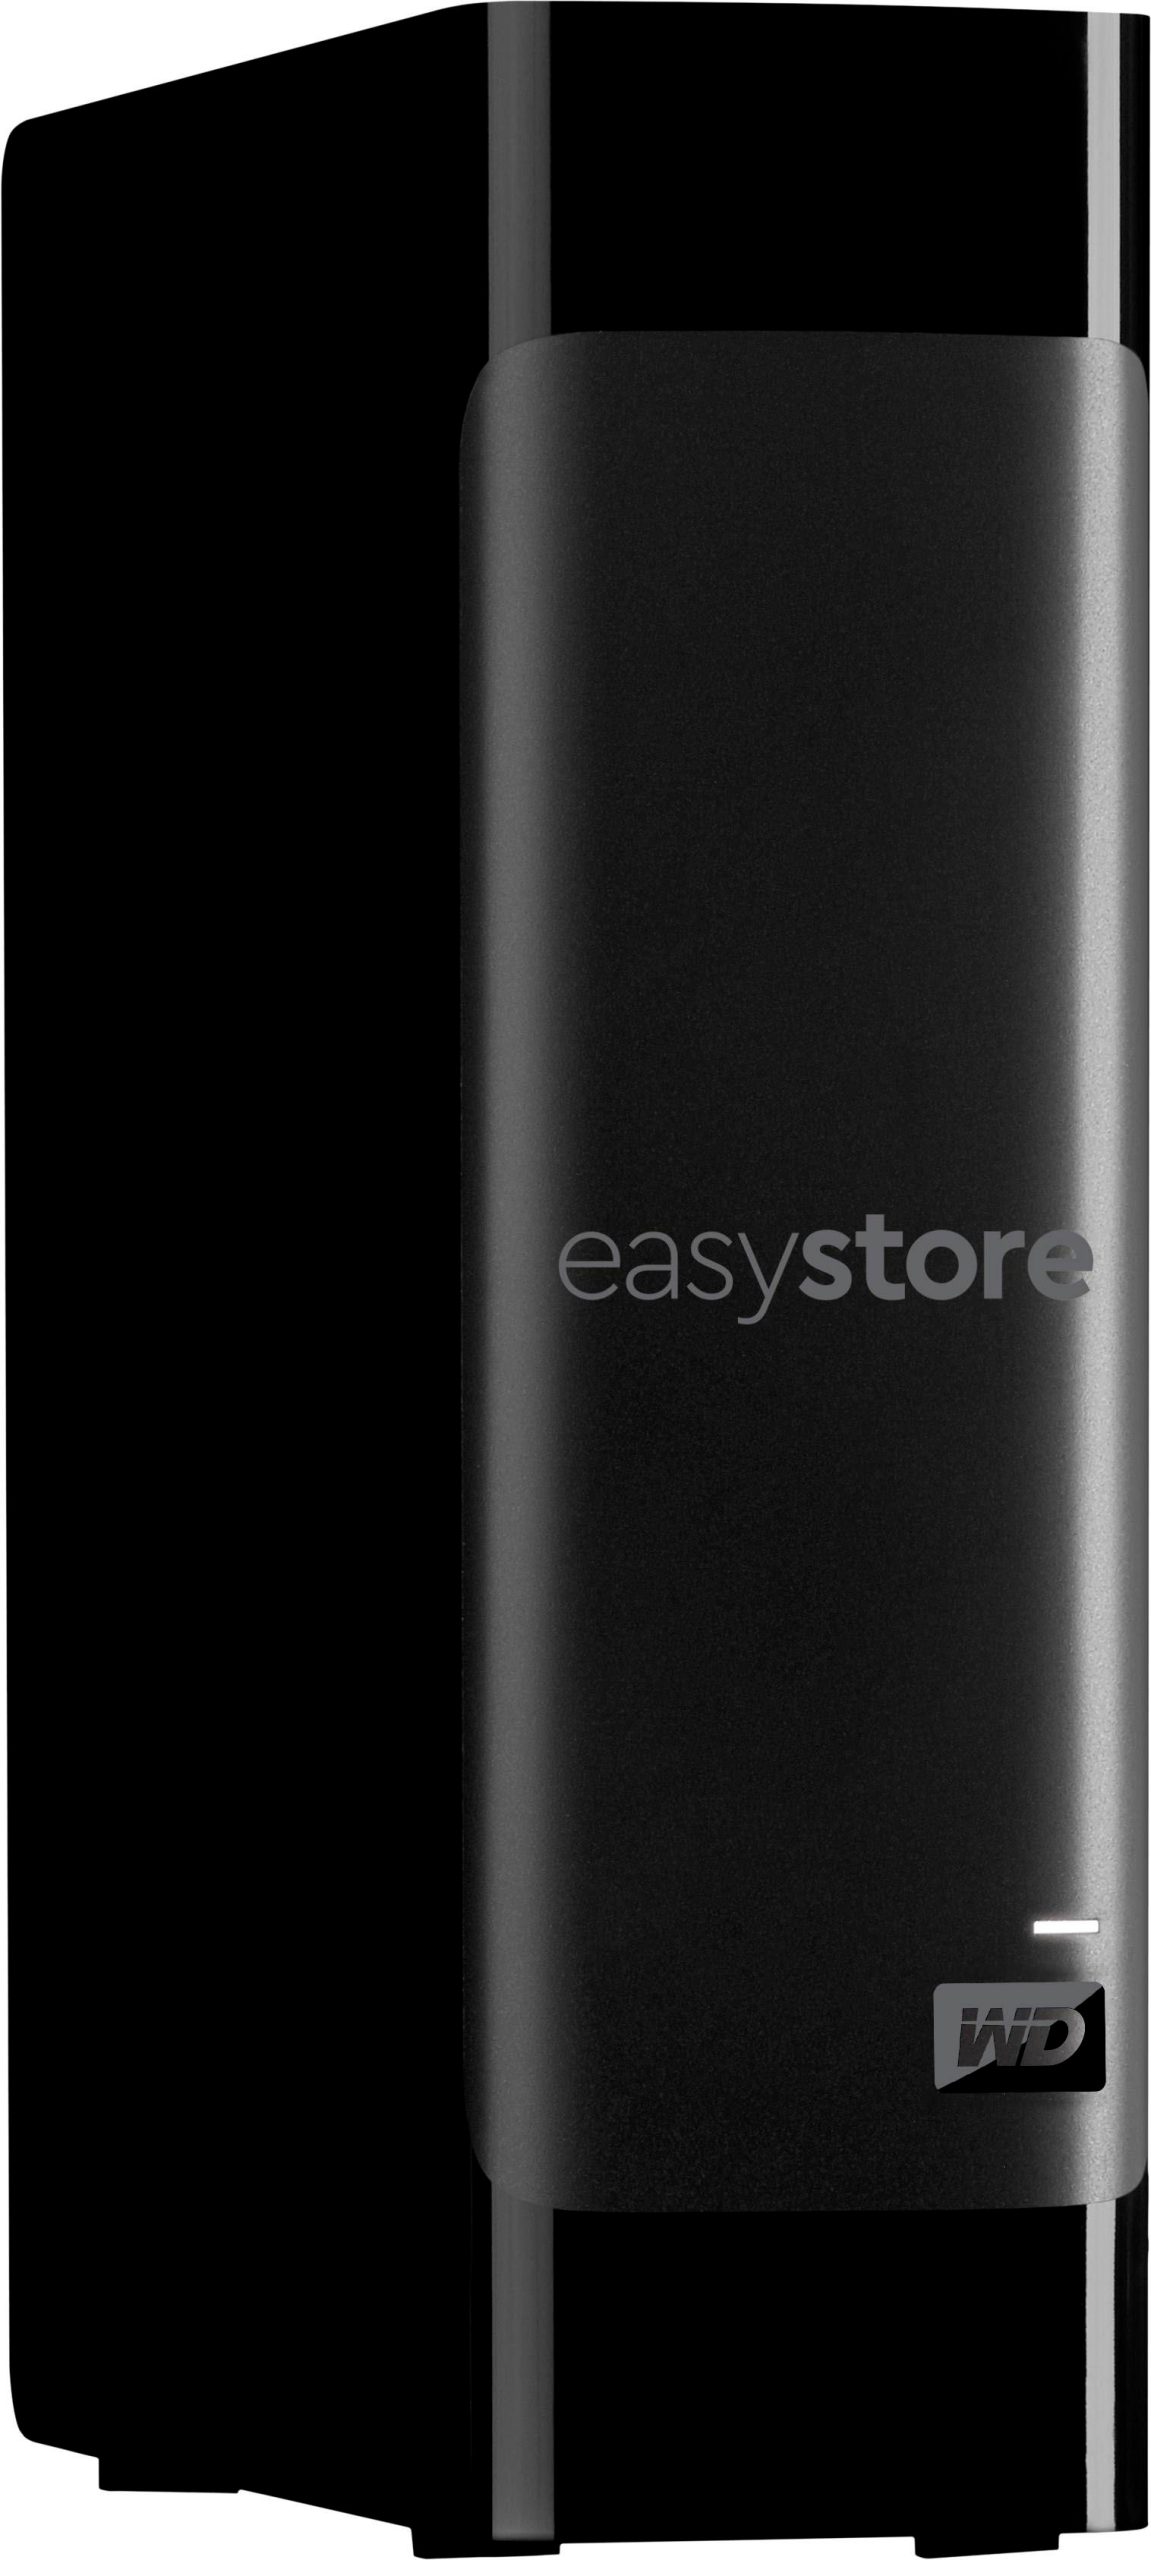 WD – easystore 18TB External USB 3.0 Portable Hard Drive – Black – Just $279.99 at Best Buy